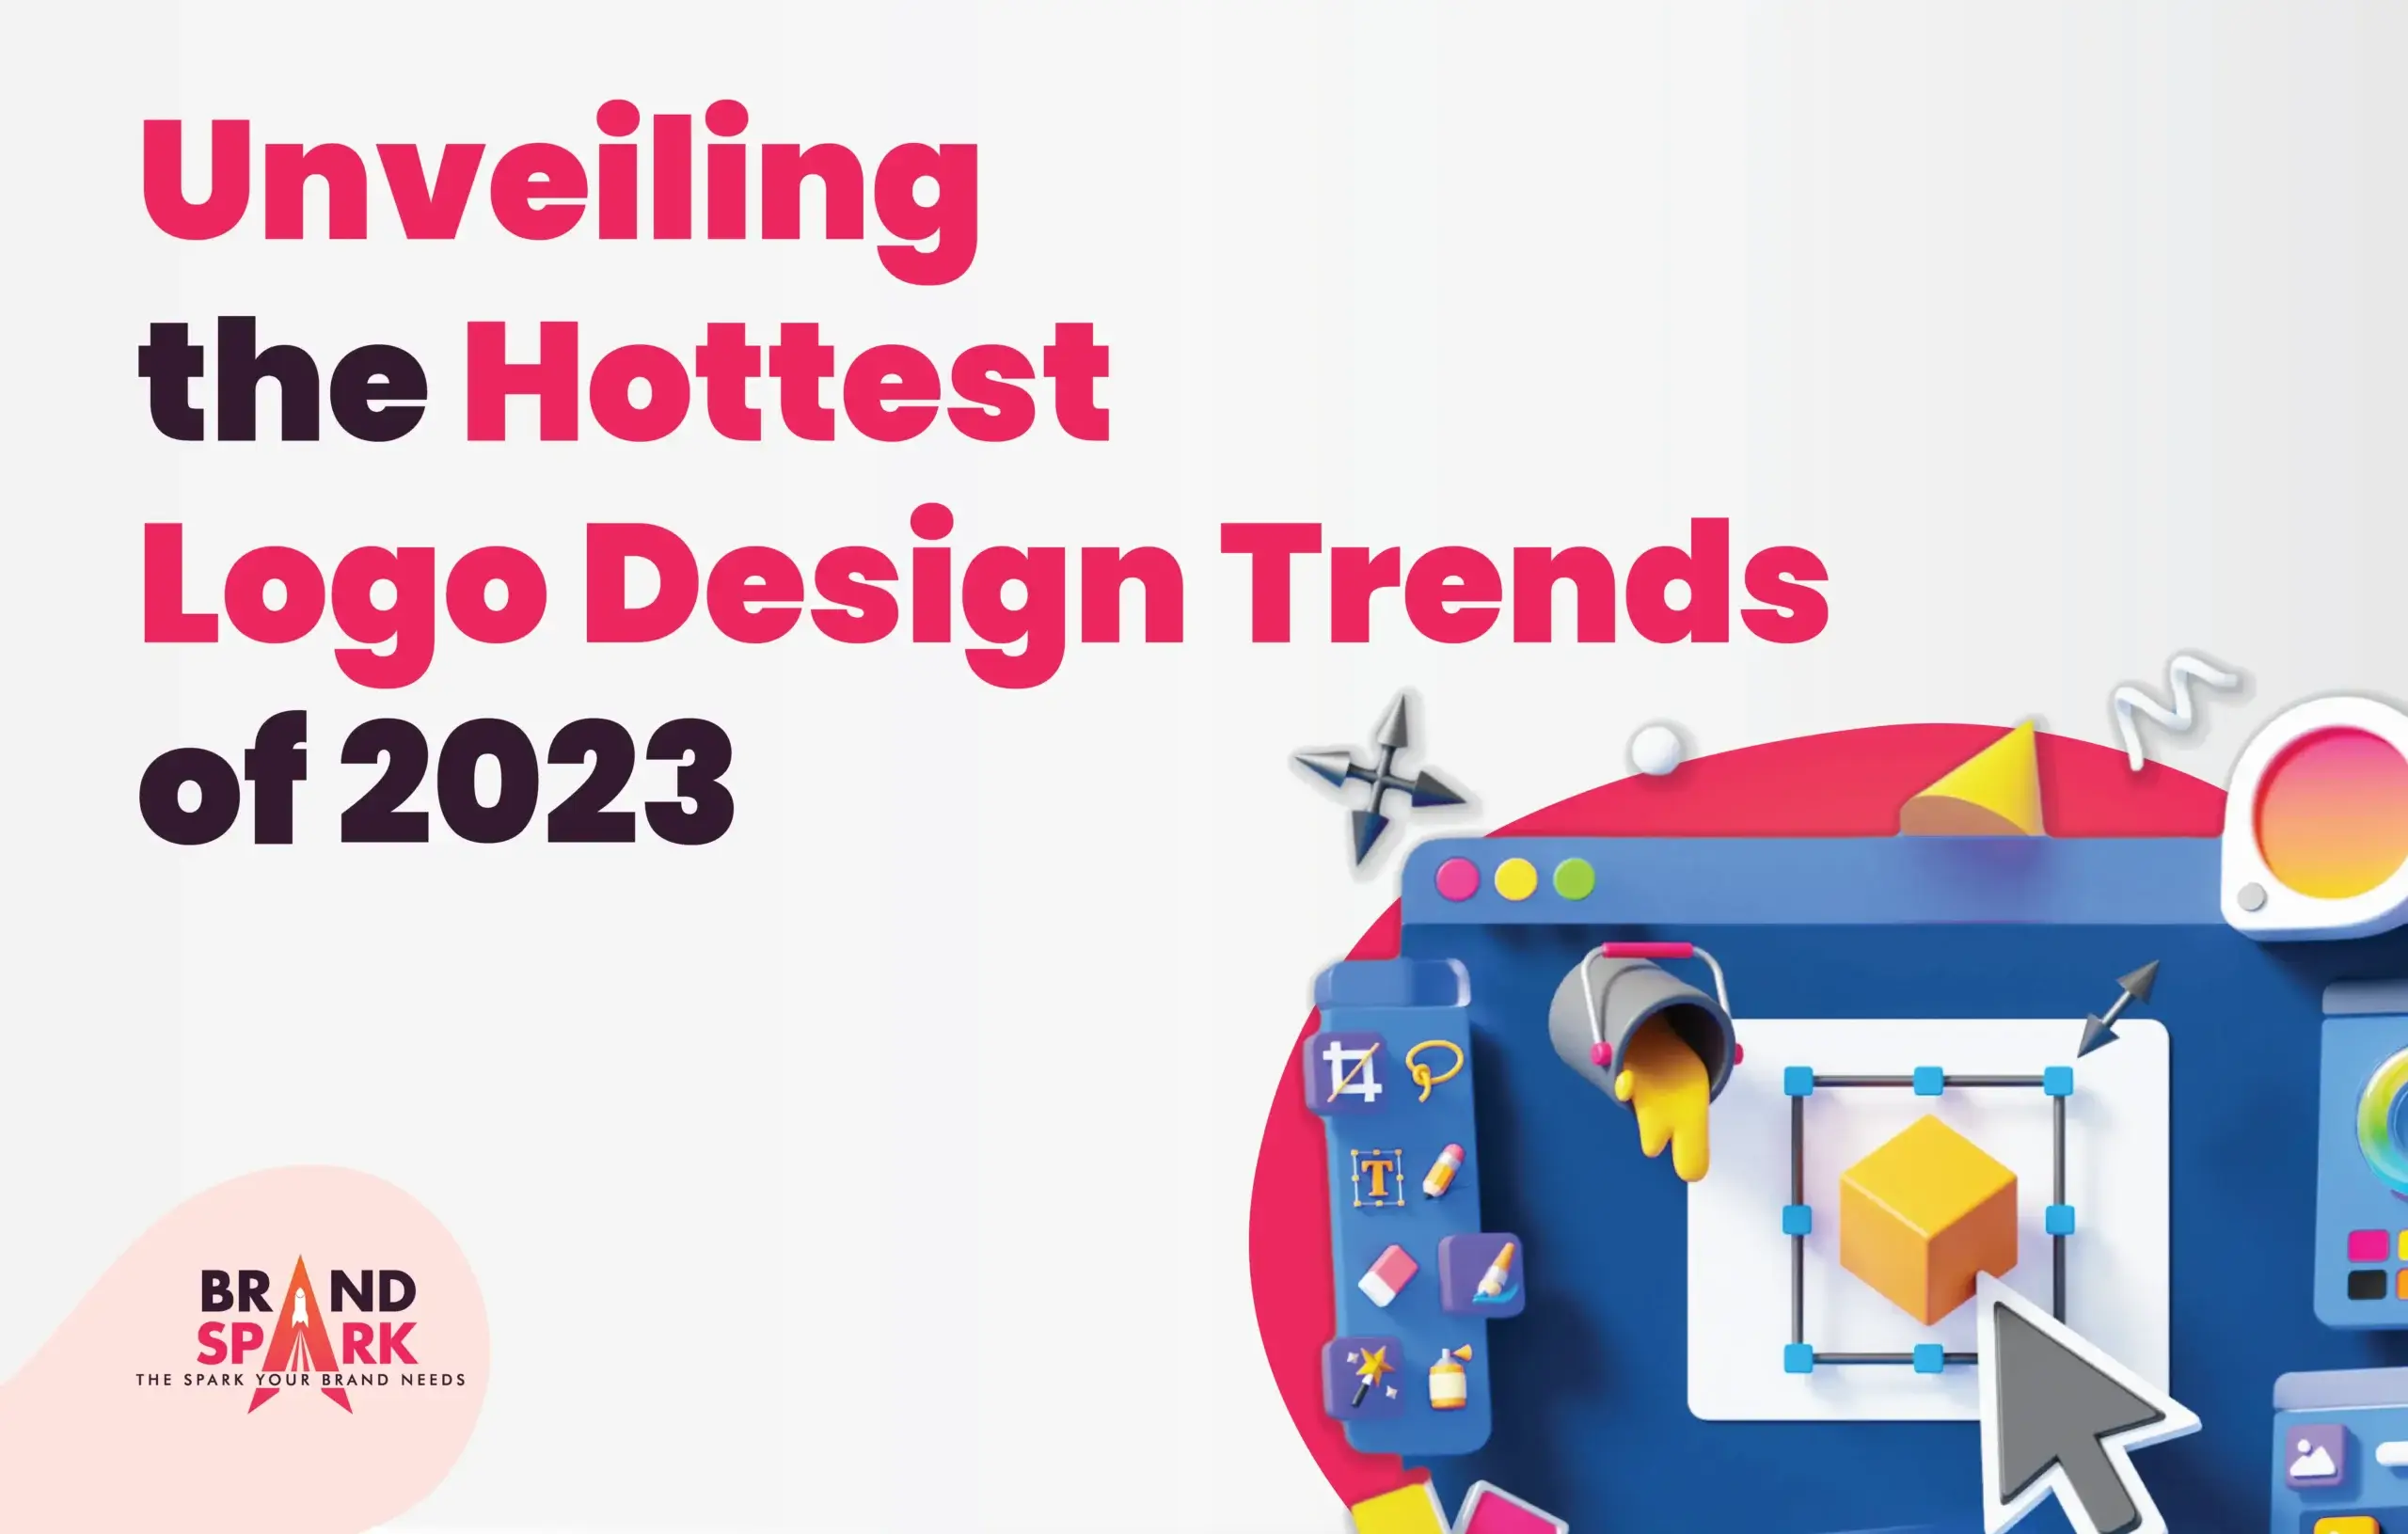 Unveiling the Hottest Logo Design Trends of 2023